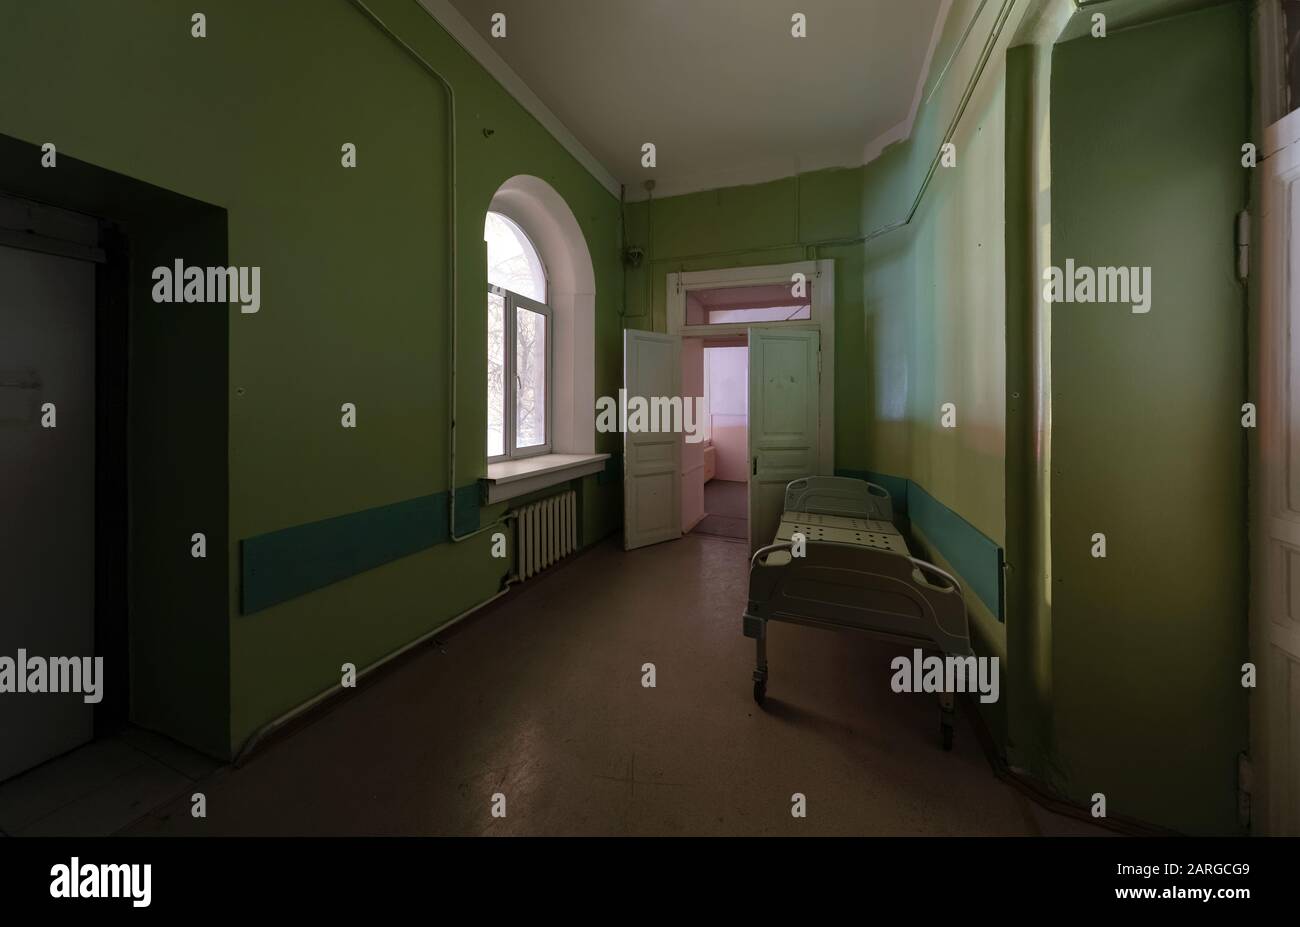 Green corridor with an empty hospital bed in an abandoned hospital Stock Photo